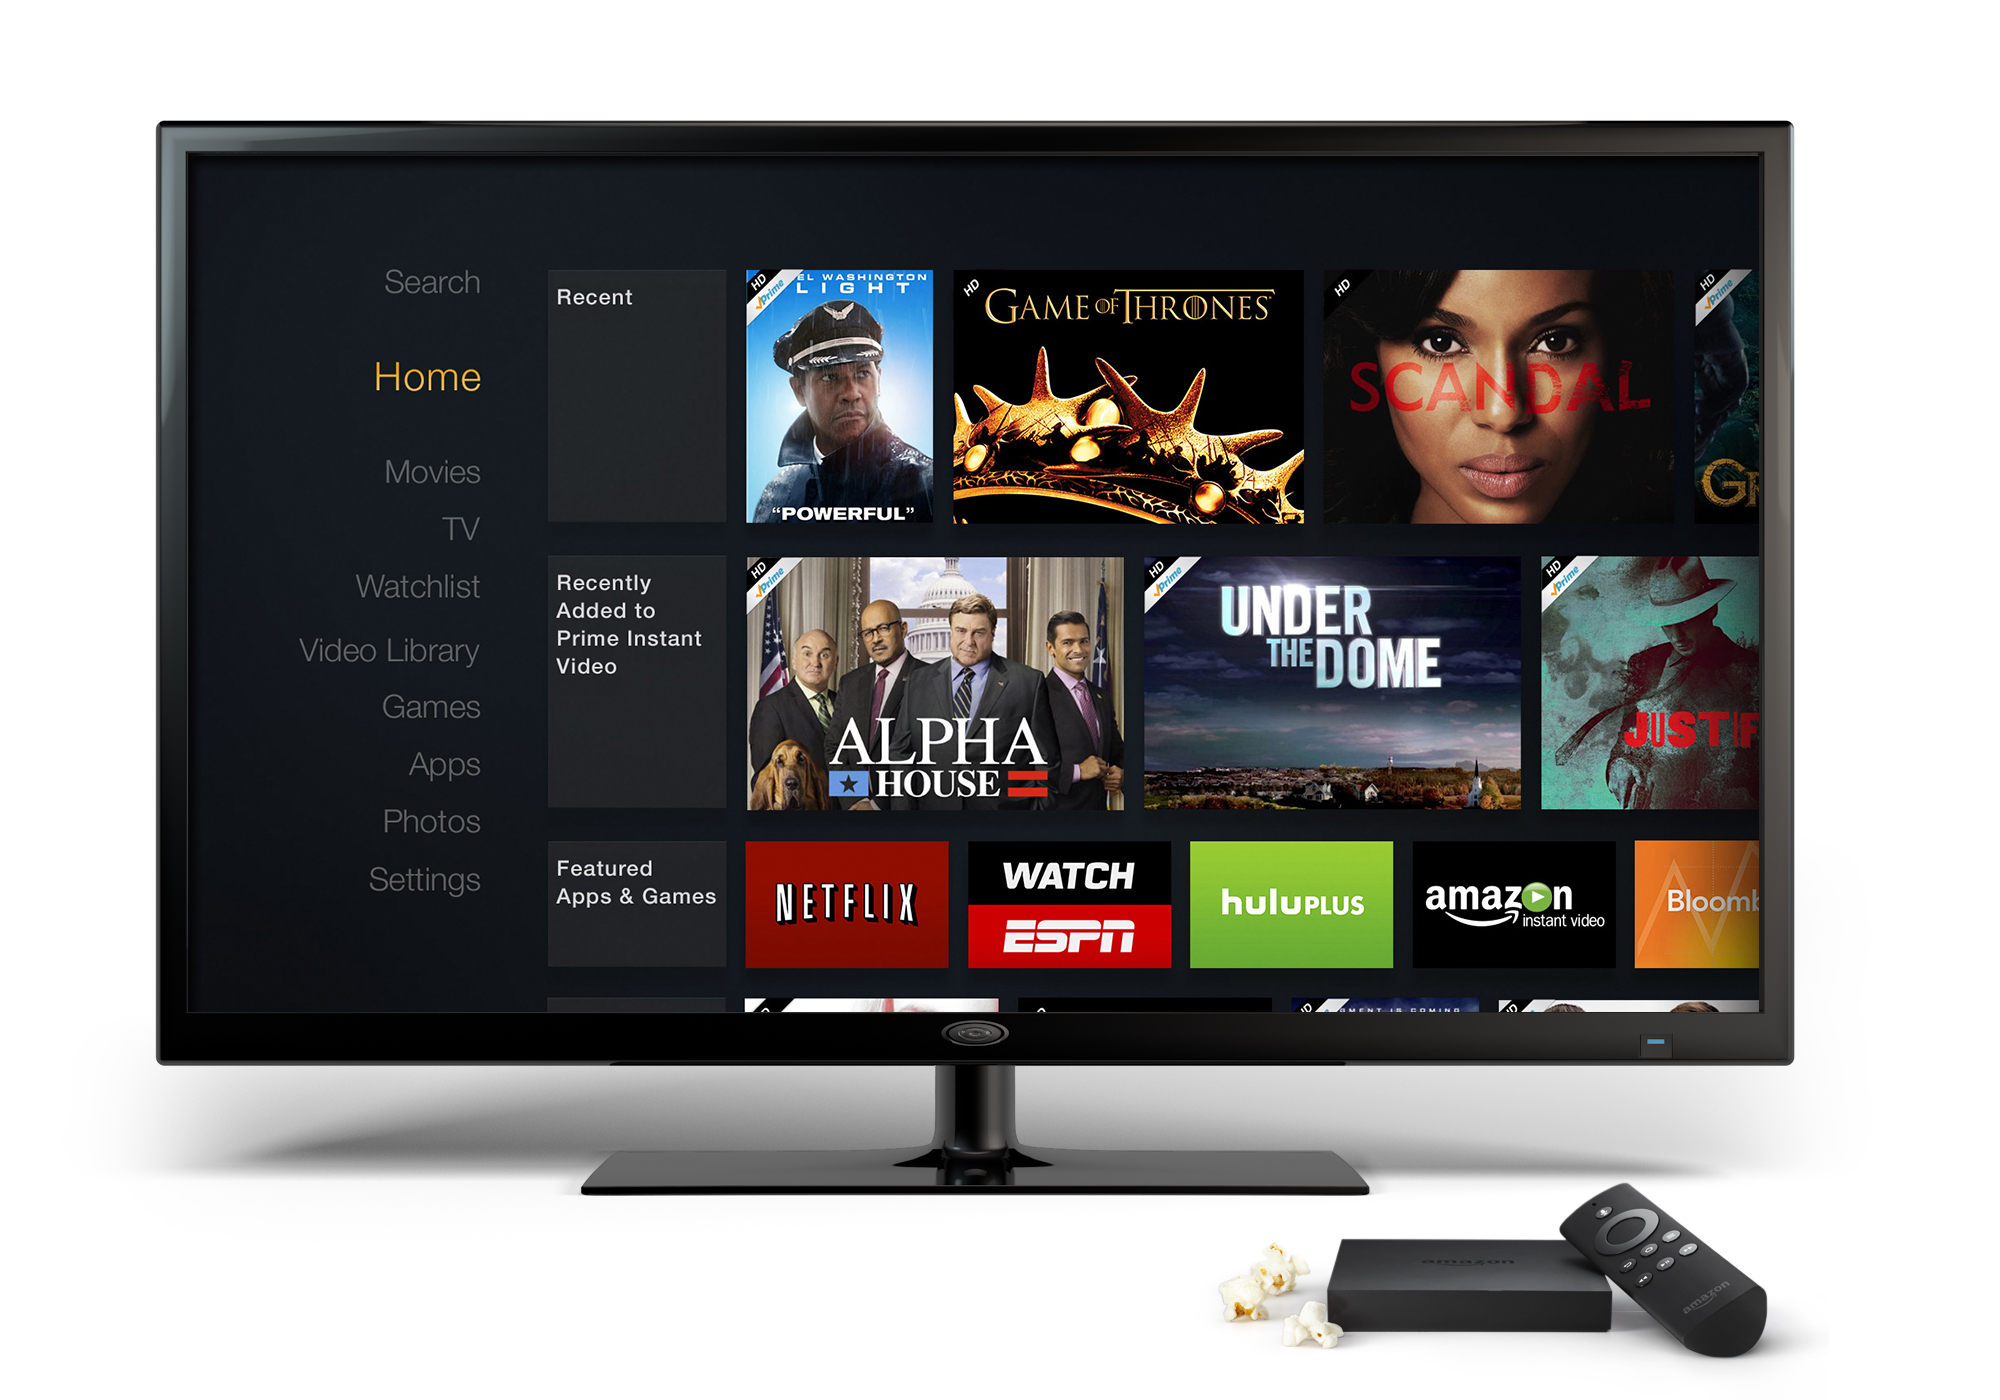 Amazon announces Flappy Birds Family exclusivity for Fire TV, as well as Disney, WWE and MLB TV apps